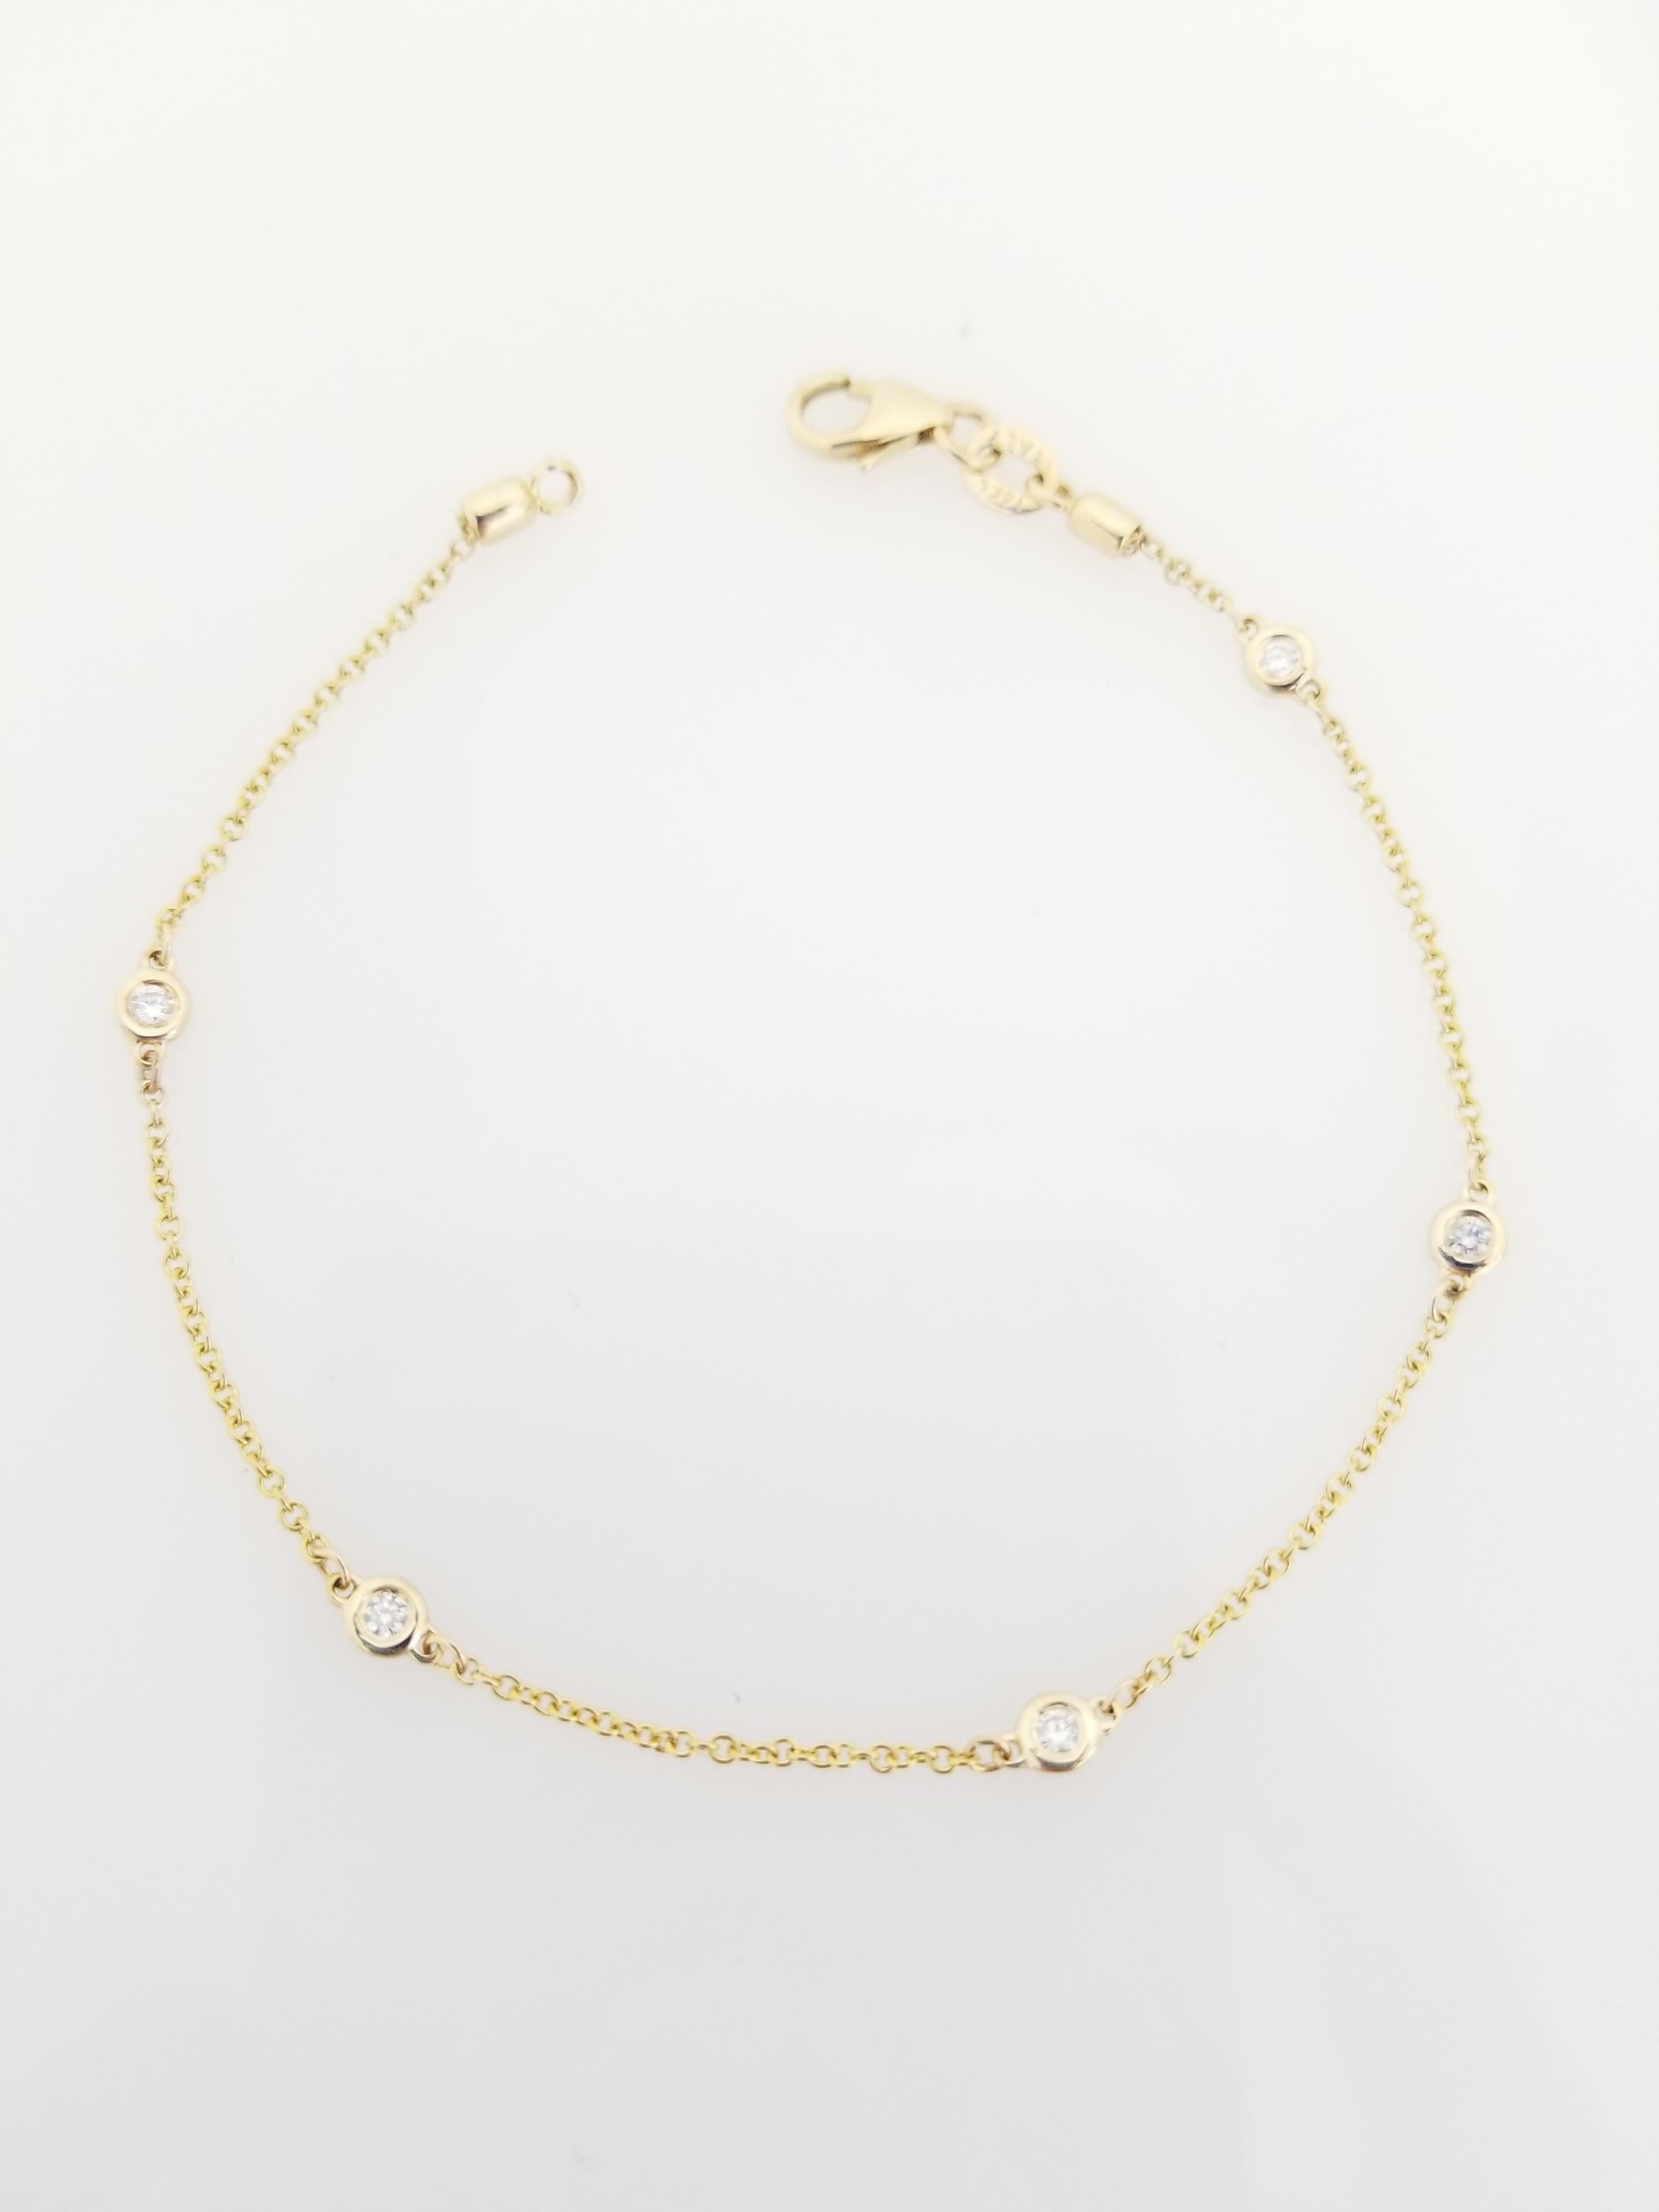 Beautiful Collection 5 Stations Diamond By The Yard Bracelet 14K Yellow Gold. 0.25 ctw. 7 Inch. 